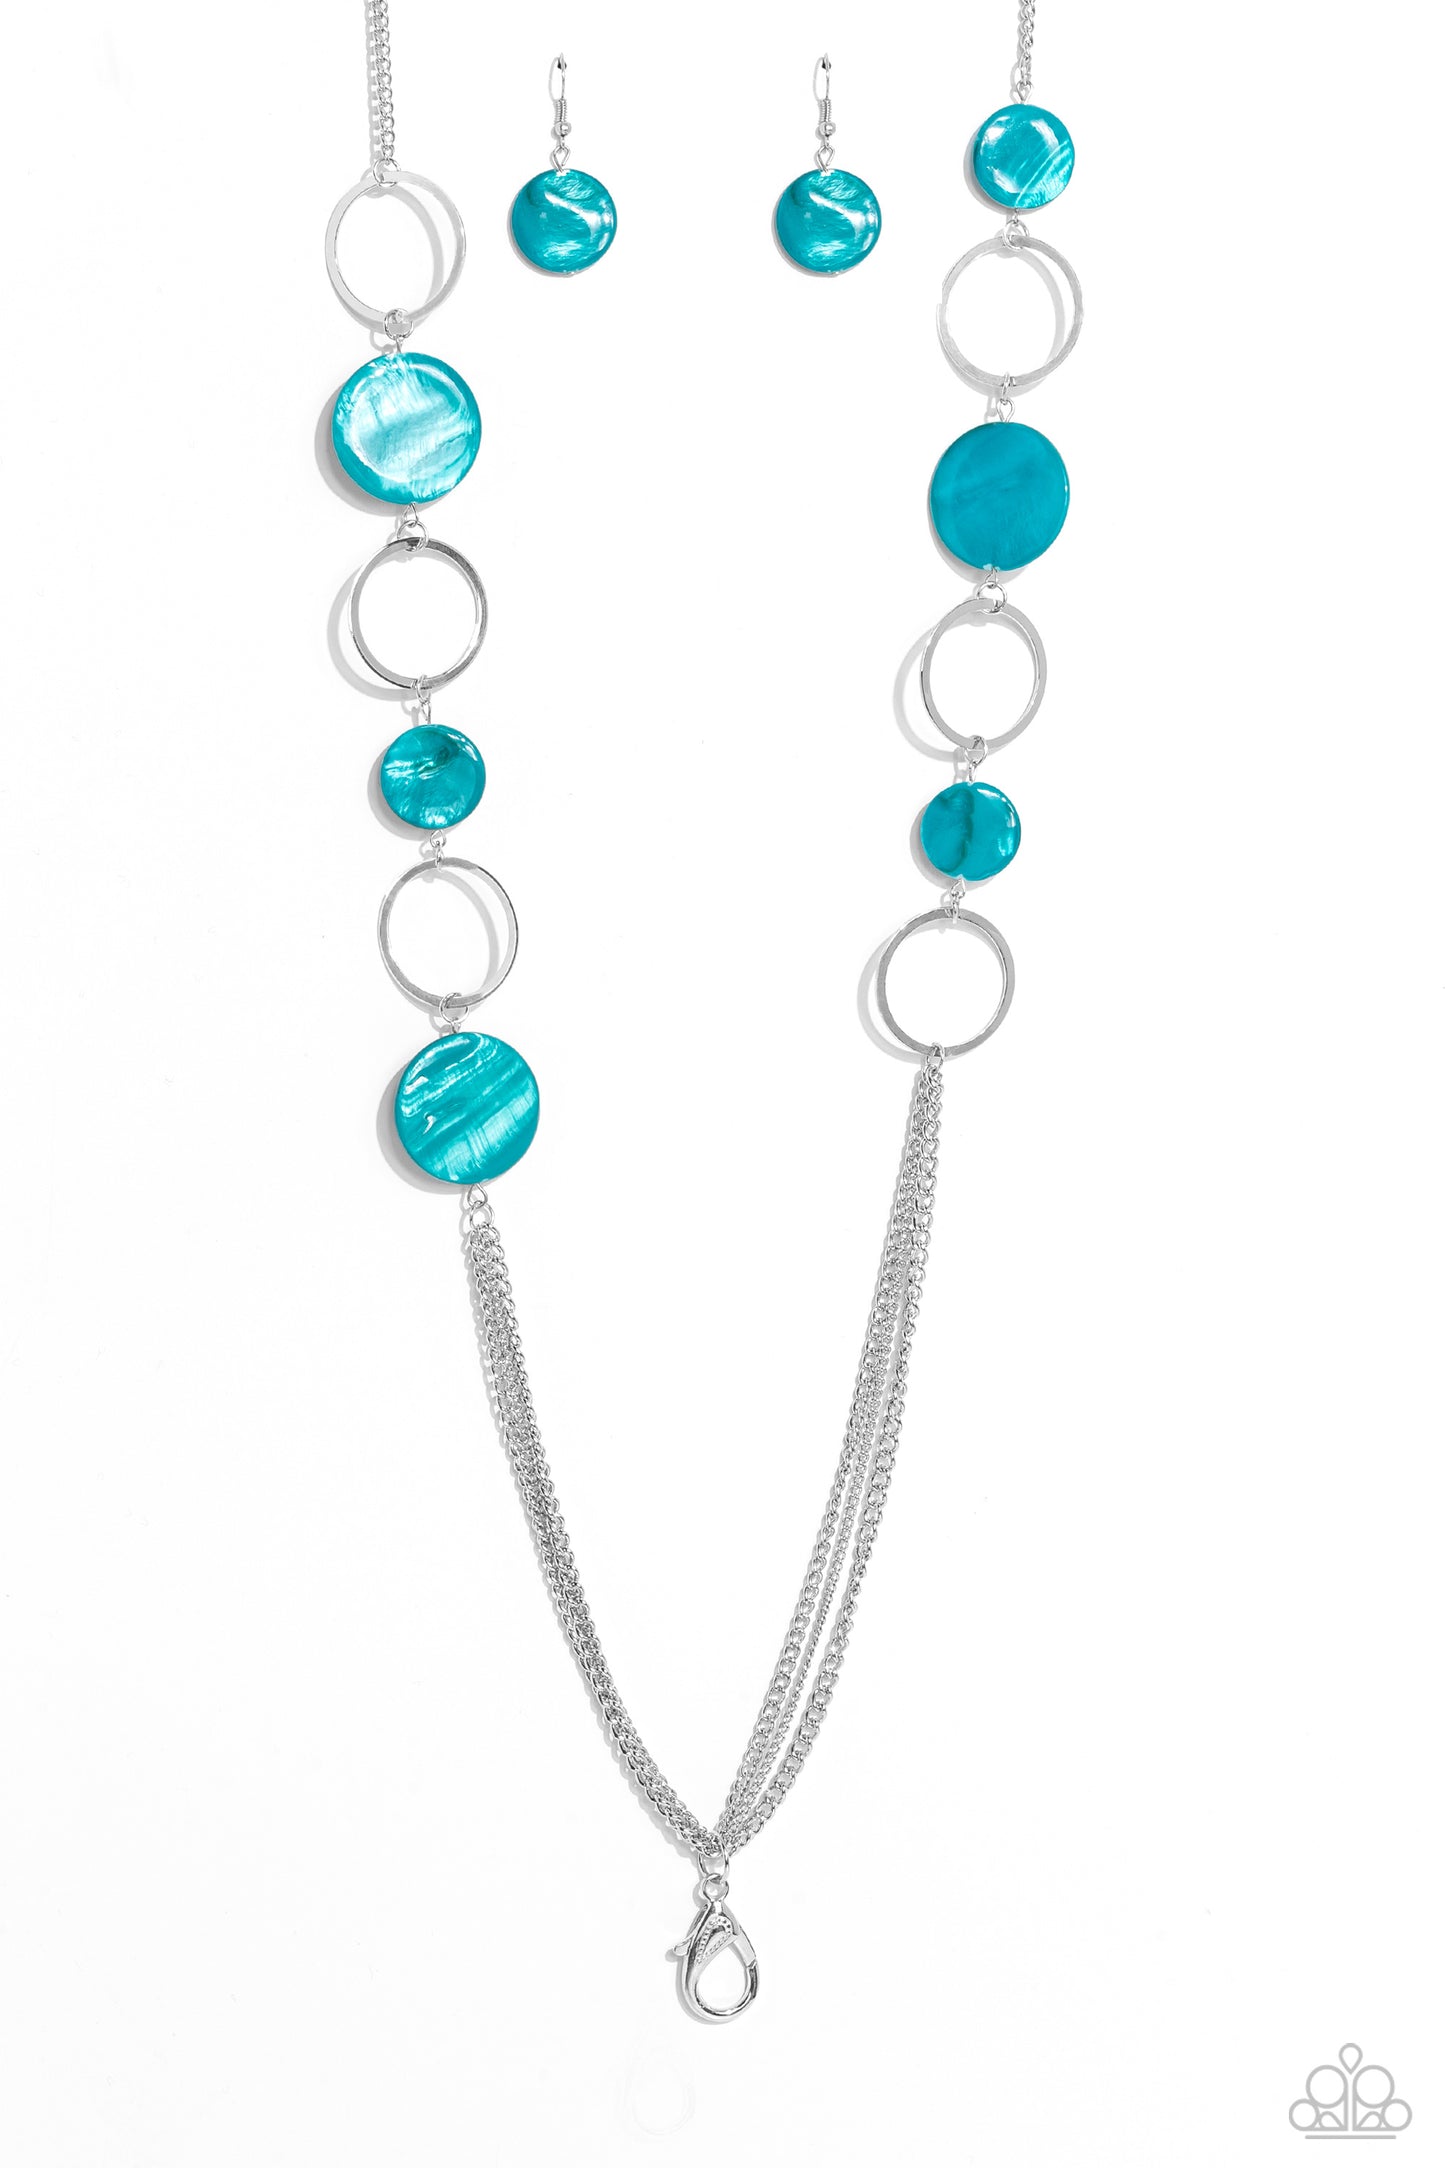 Paparazzi Accessories Beach Hub - Blue *Lanyard Sections of blue shell-like discs link with flat silver hoops down the chest, giving way to layers of shimmery silver chain for a tropical inspired flair. A lobster clasp hangs from the bottom of the design